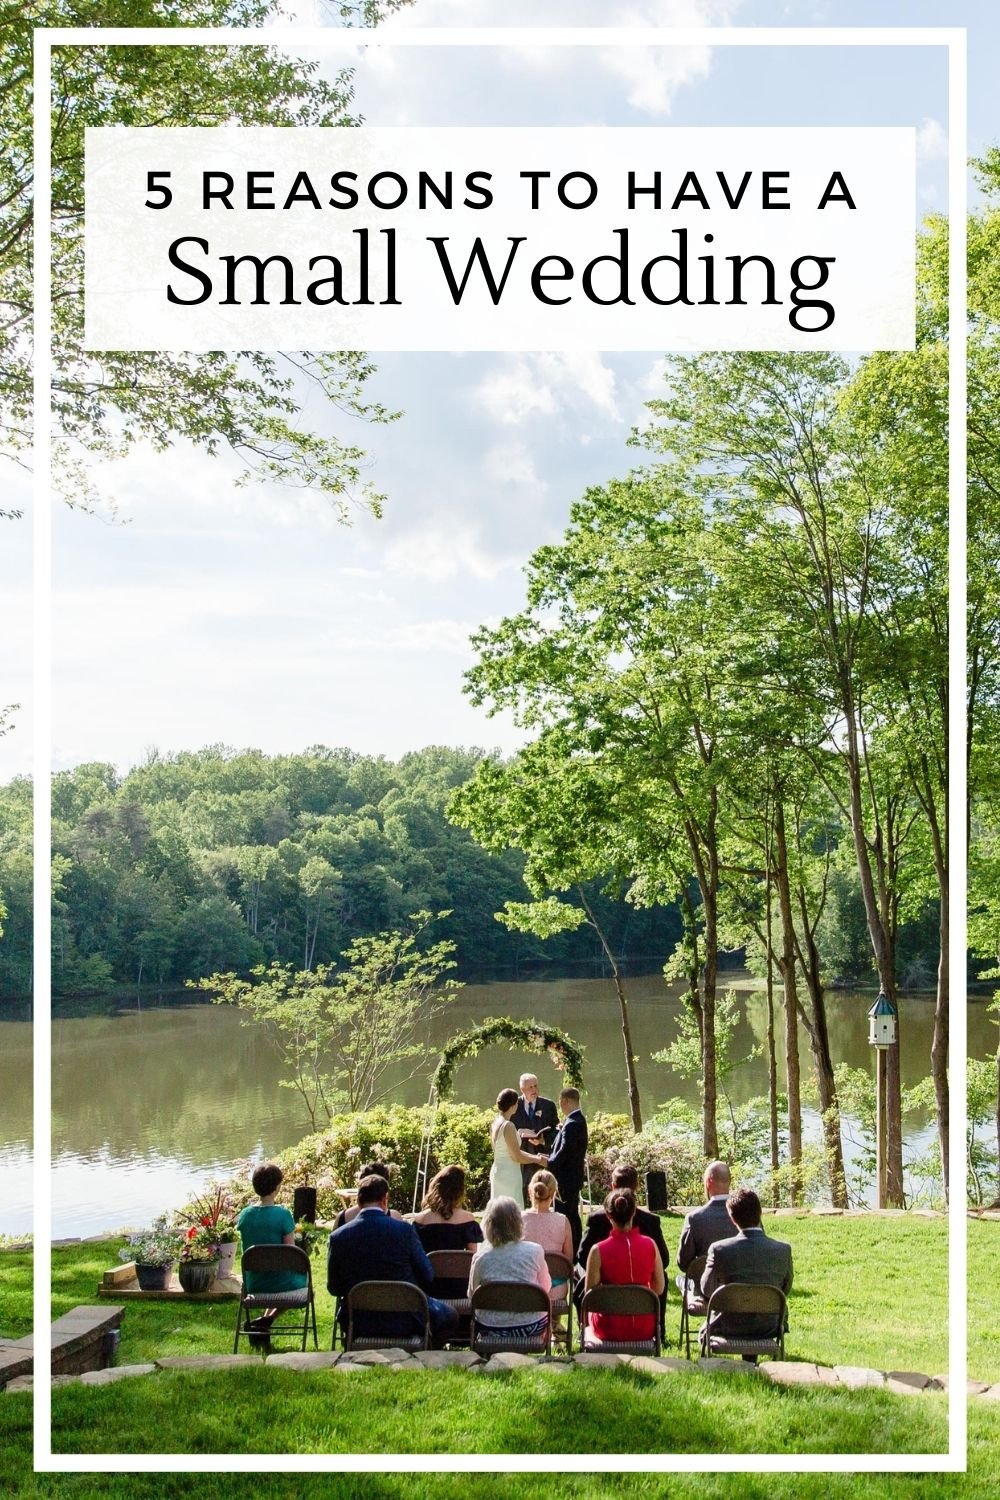 Reasons to have a small wedding